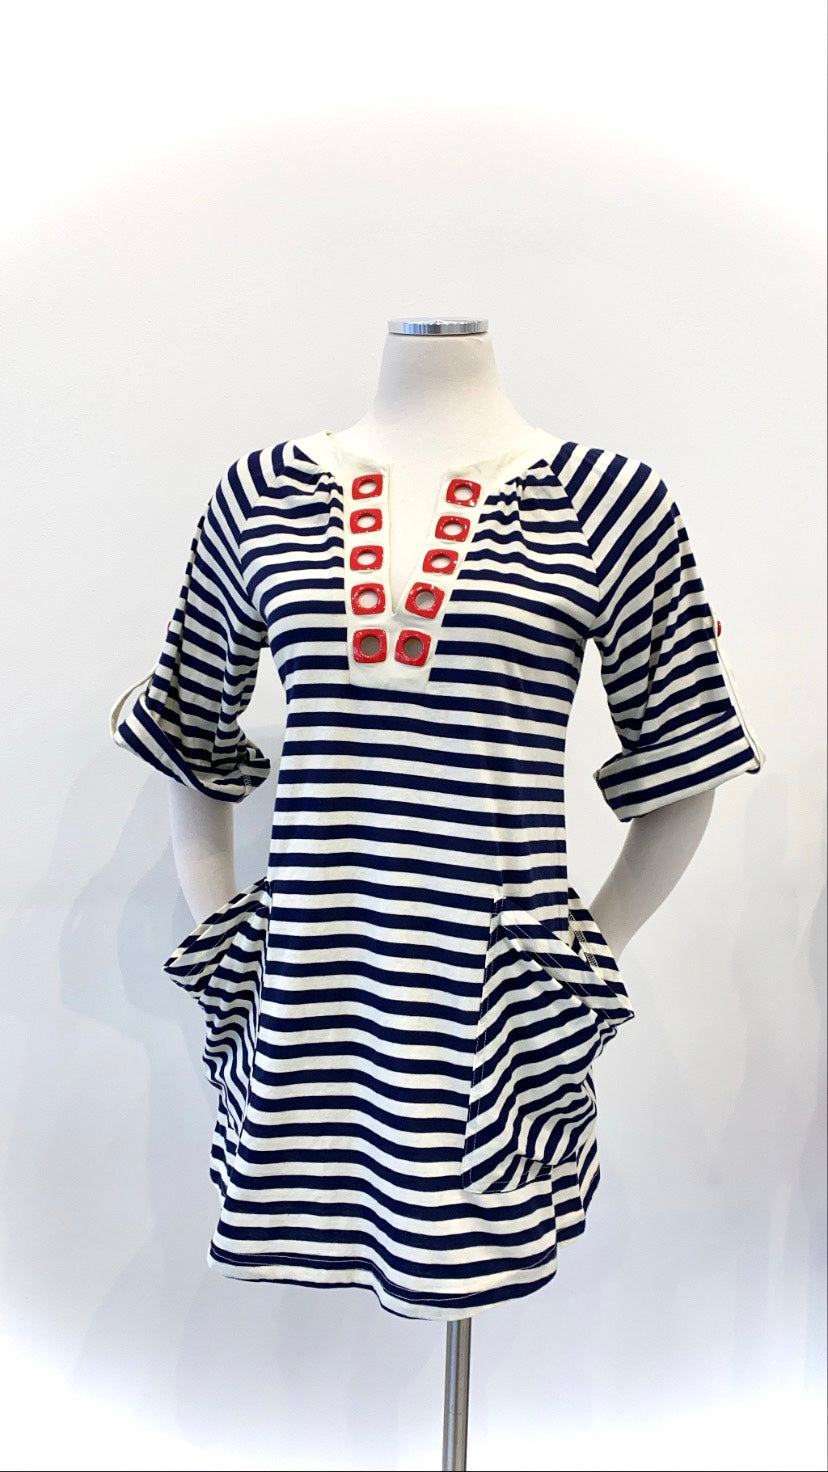 Nanette Lepore - Striped Cotton T-Shirt with Large Pockets